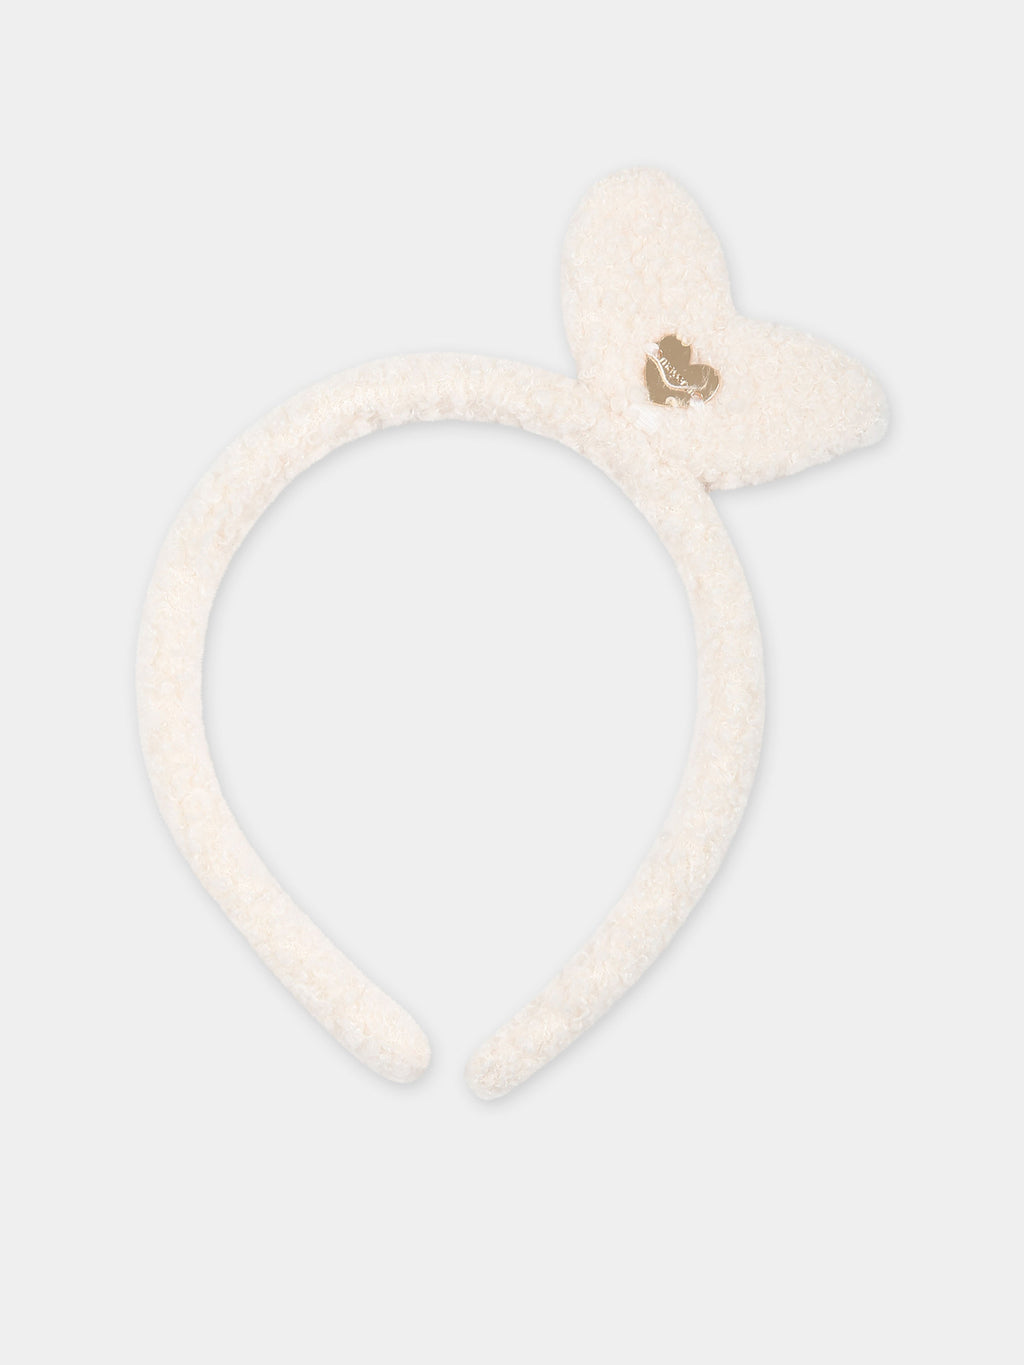 Ivory headband for baby girl with heart